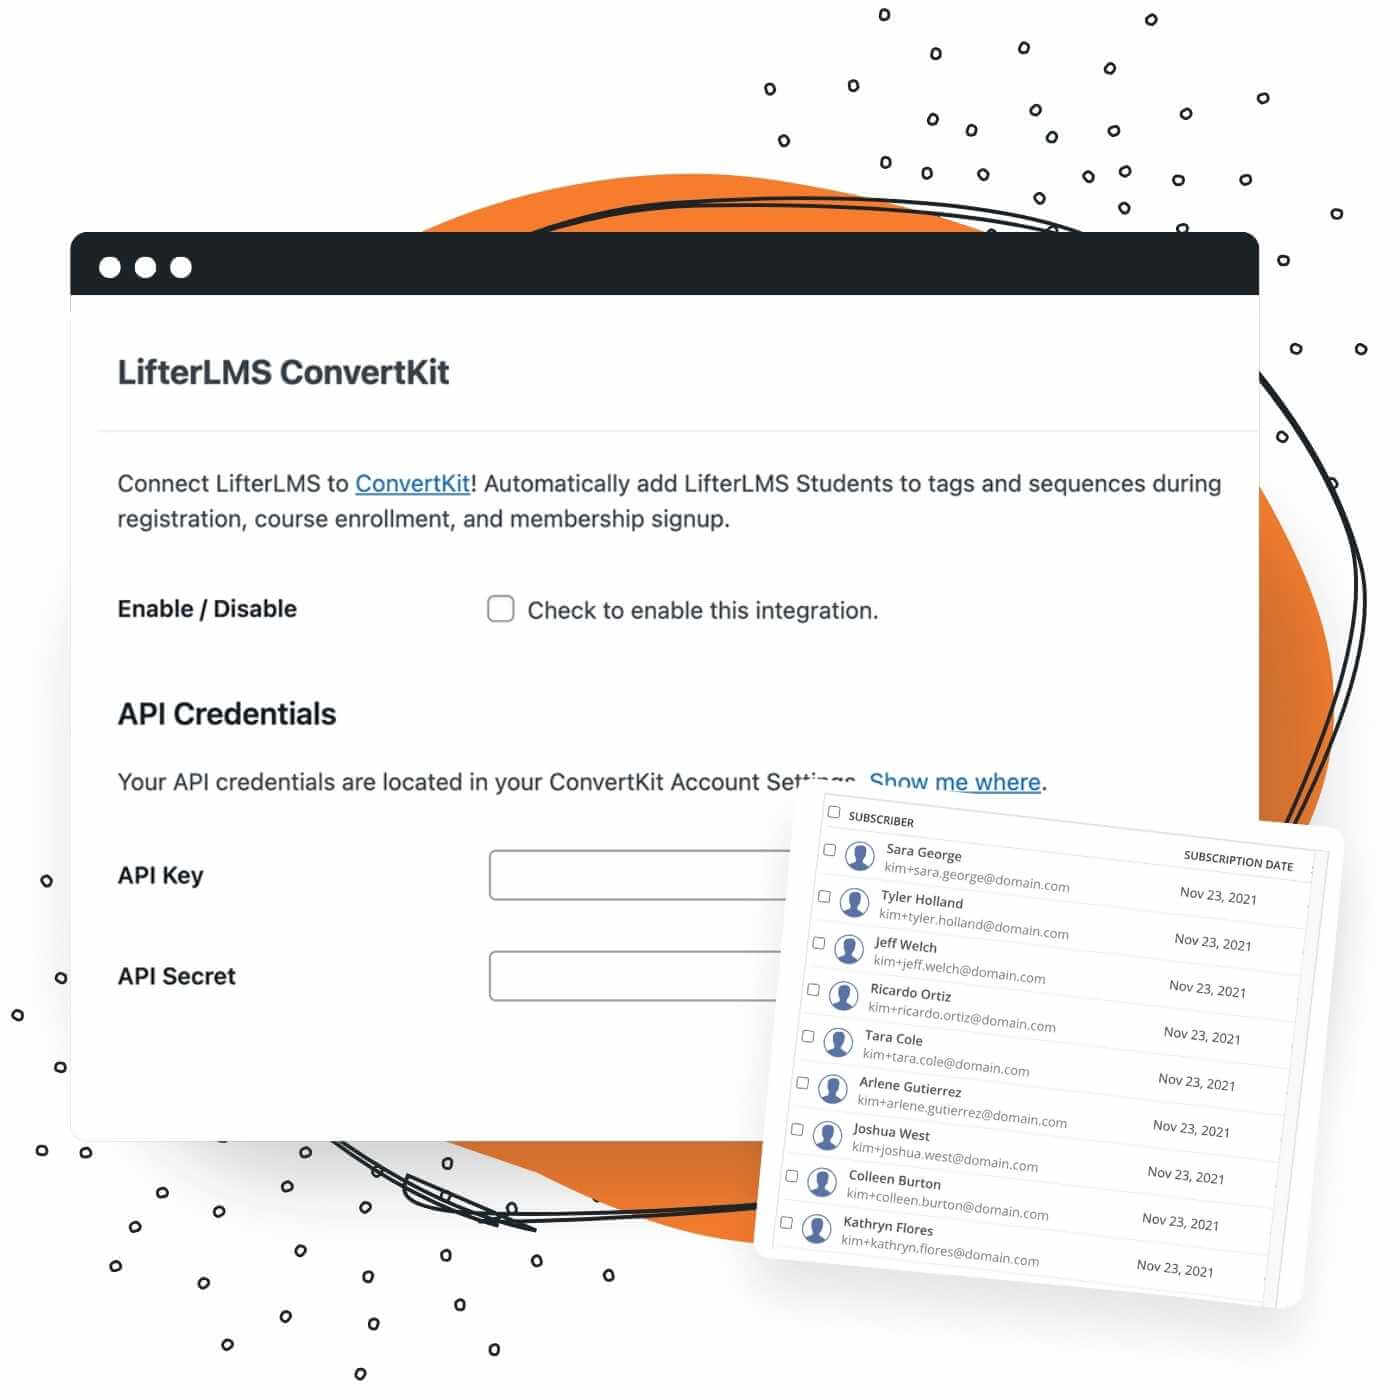 Screenshots of ConvertKit settings to connect API keys for the LifterLMS Integration